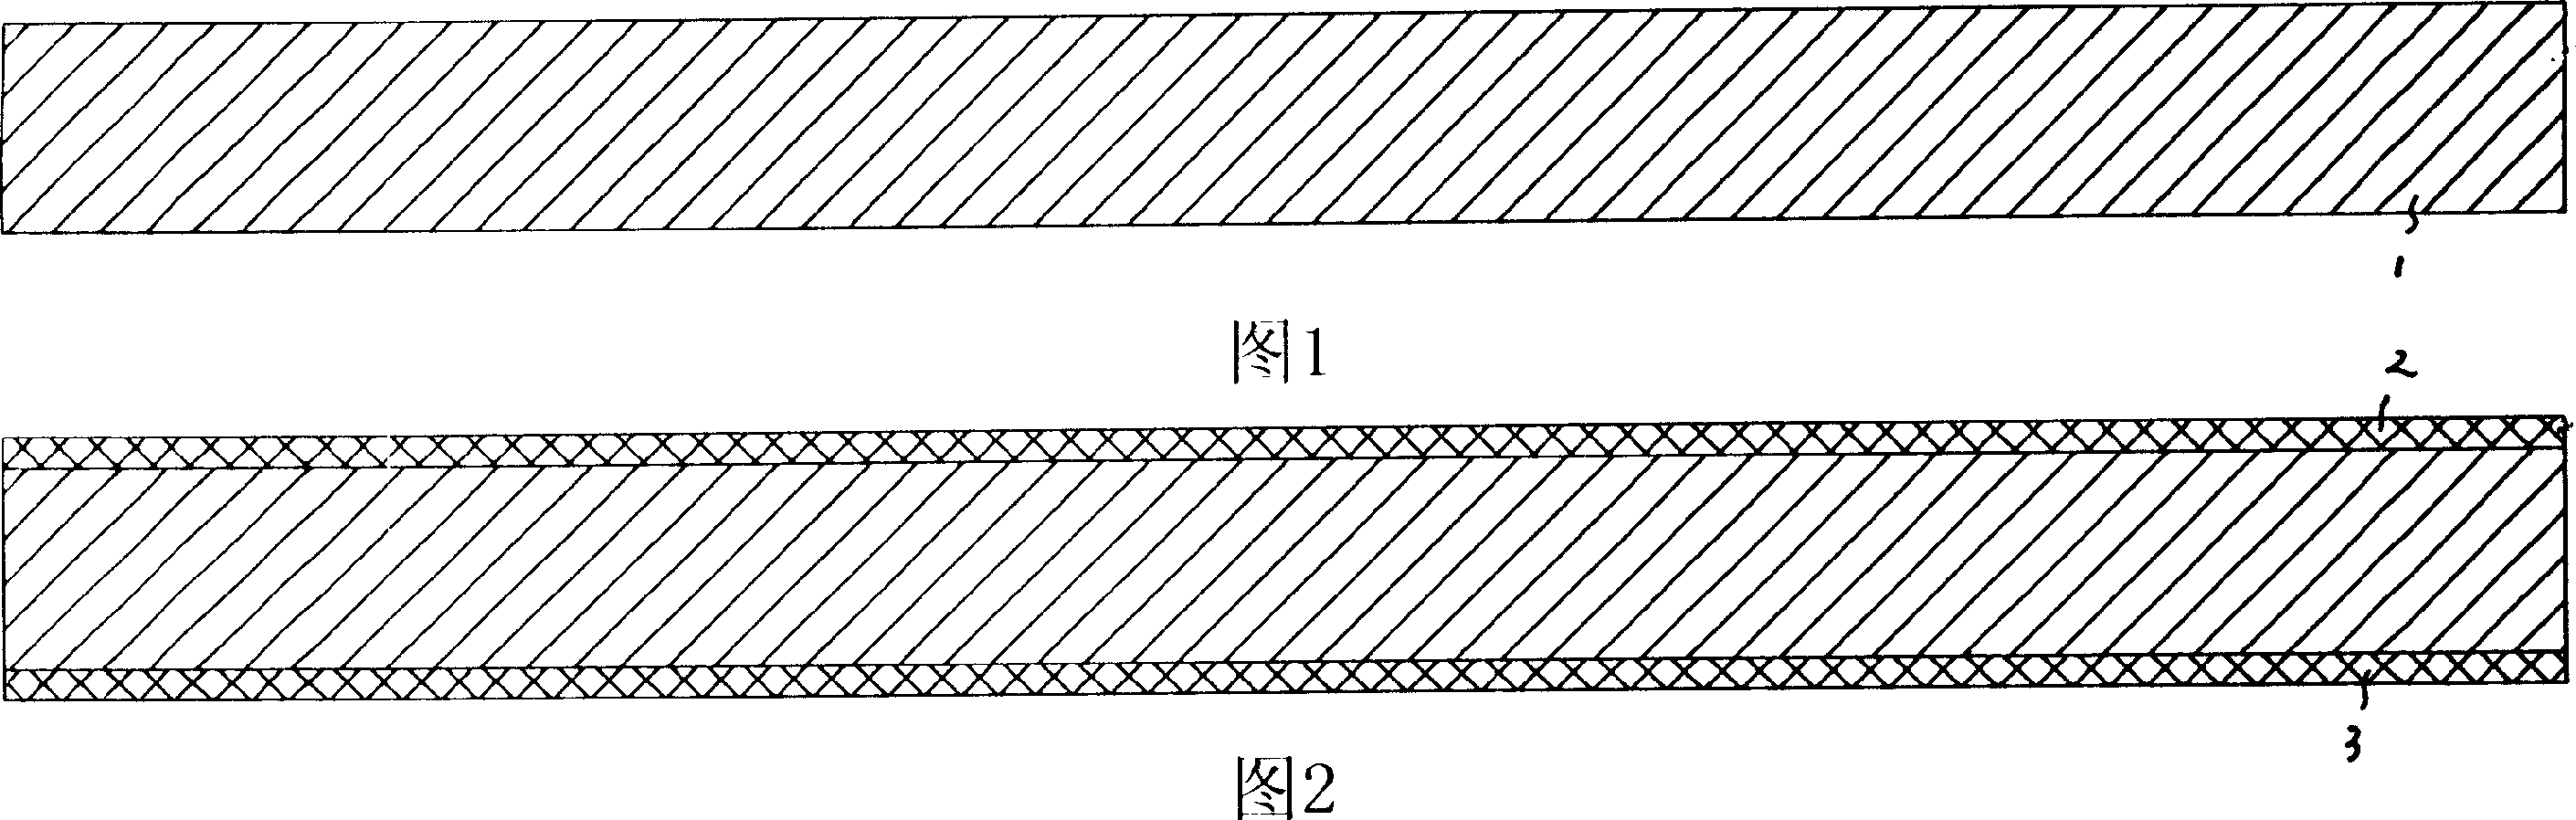 Novel integrated circuit or discrete component flat bump package technics and its package structure